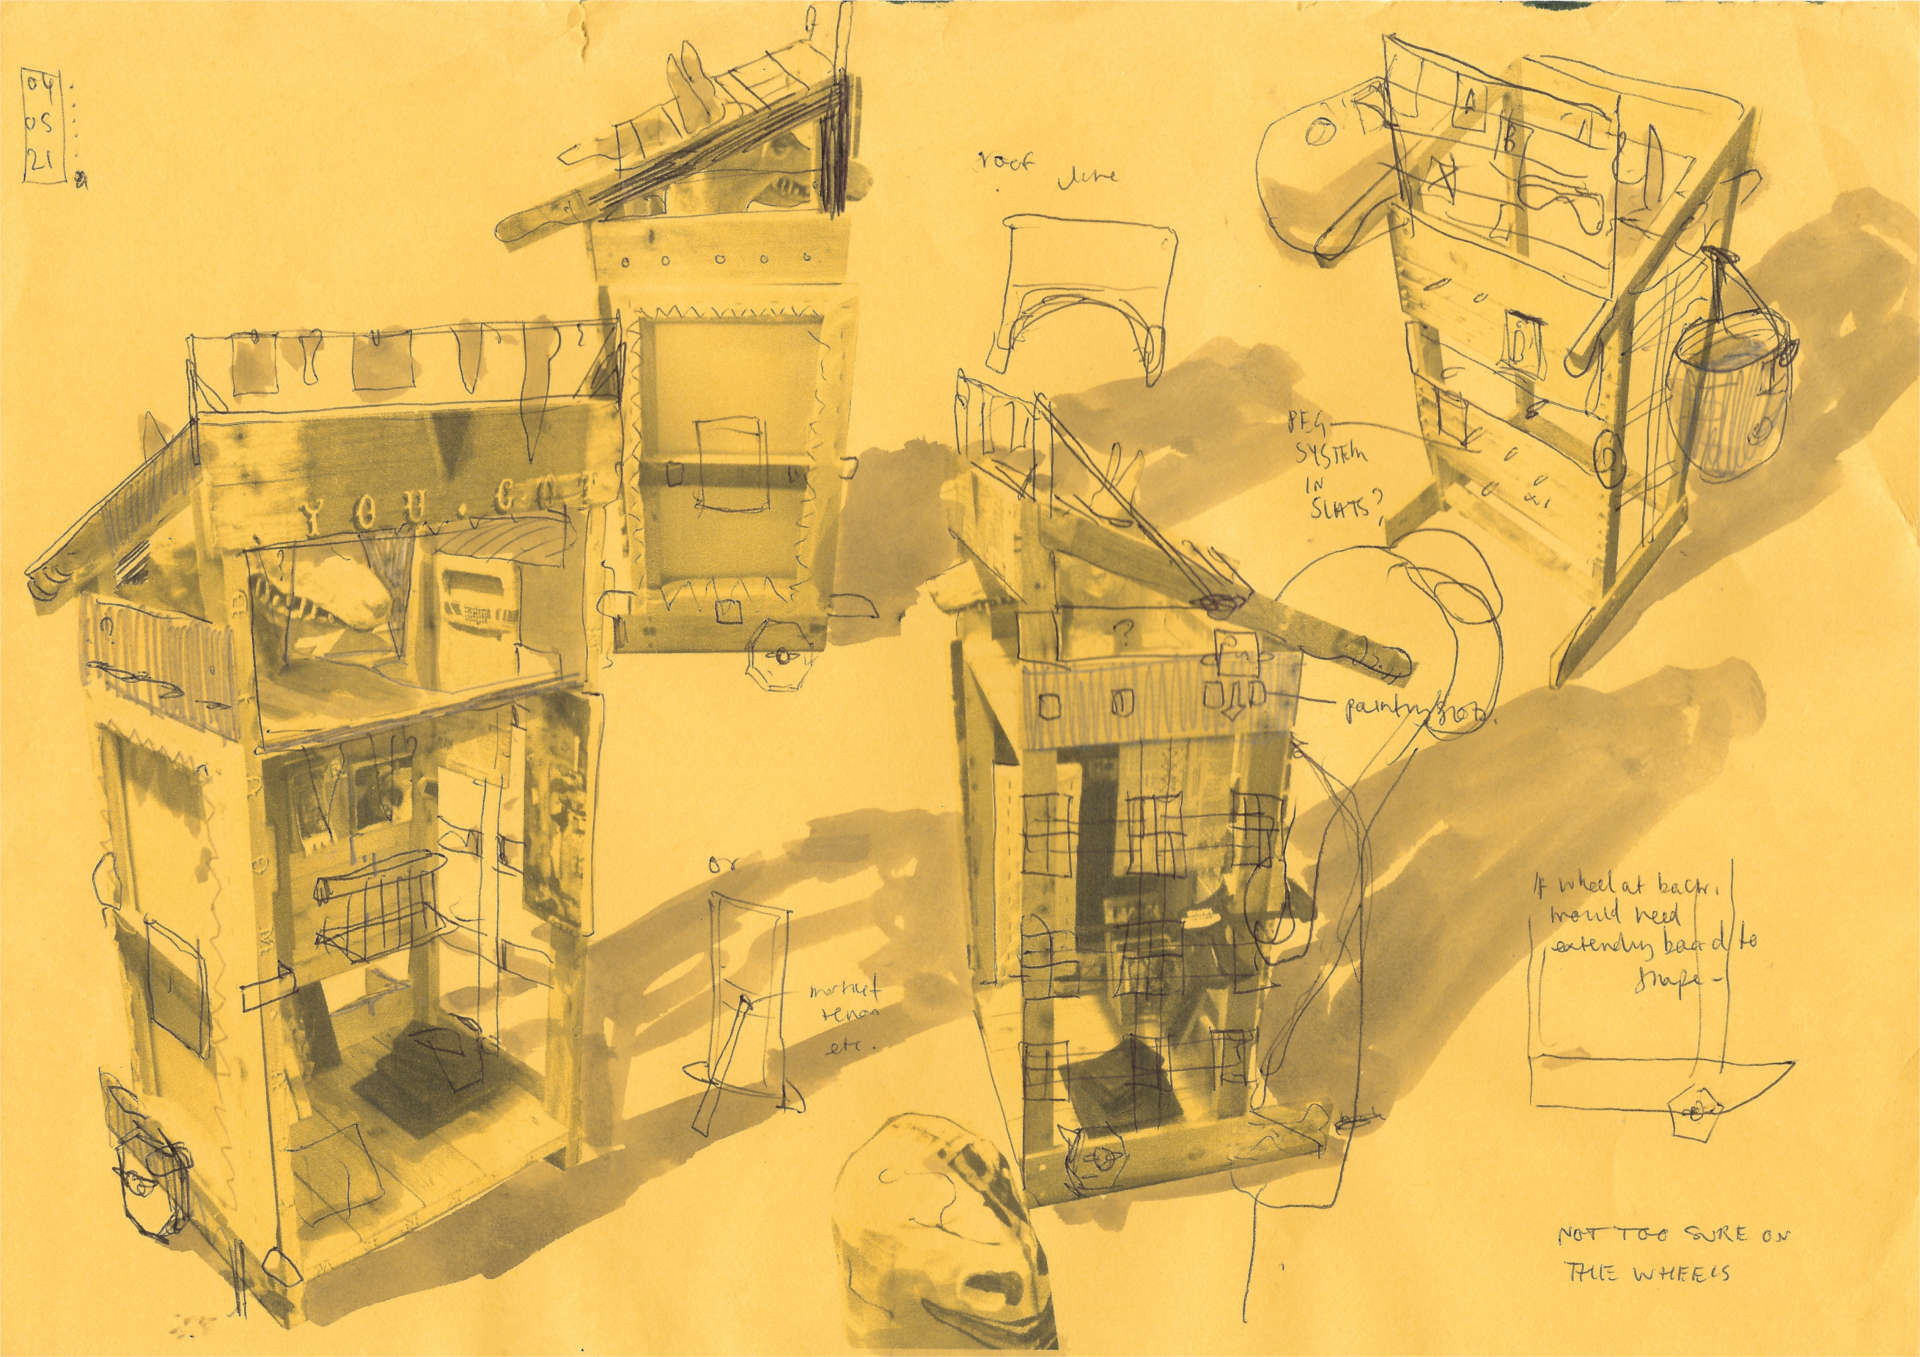 Scan of a drawing / collage showing workings out for a wooden box containing various artworks